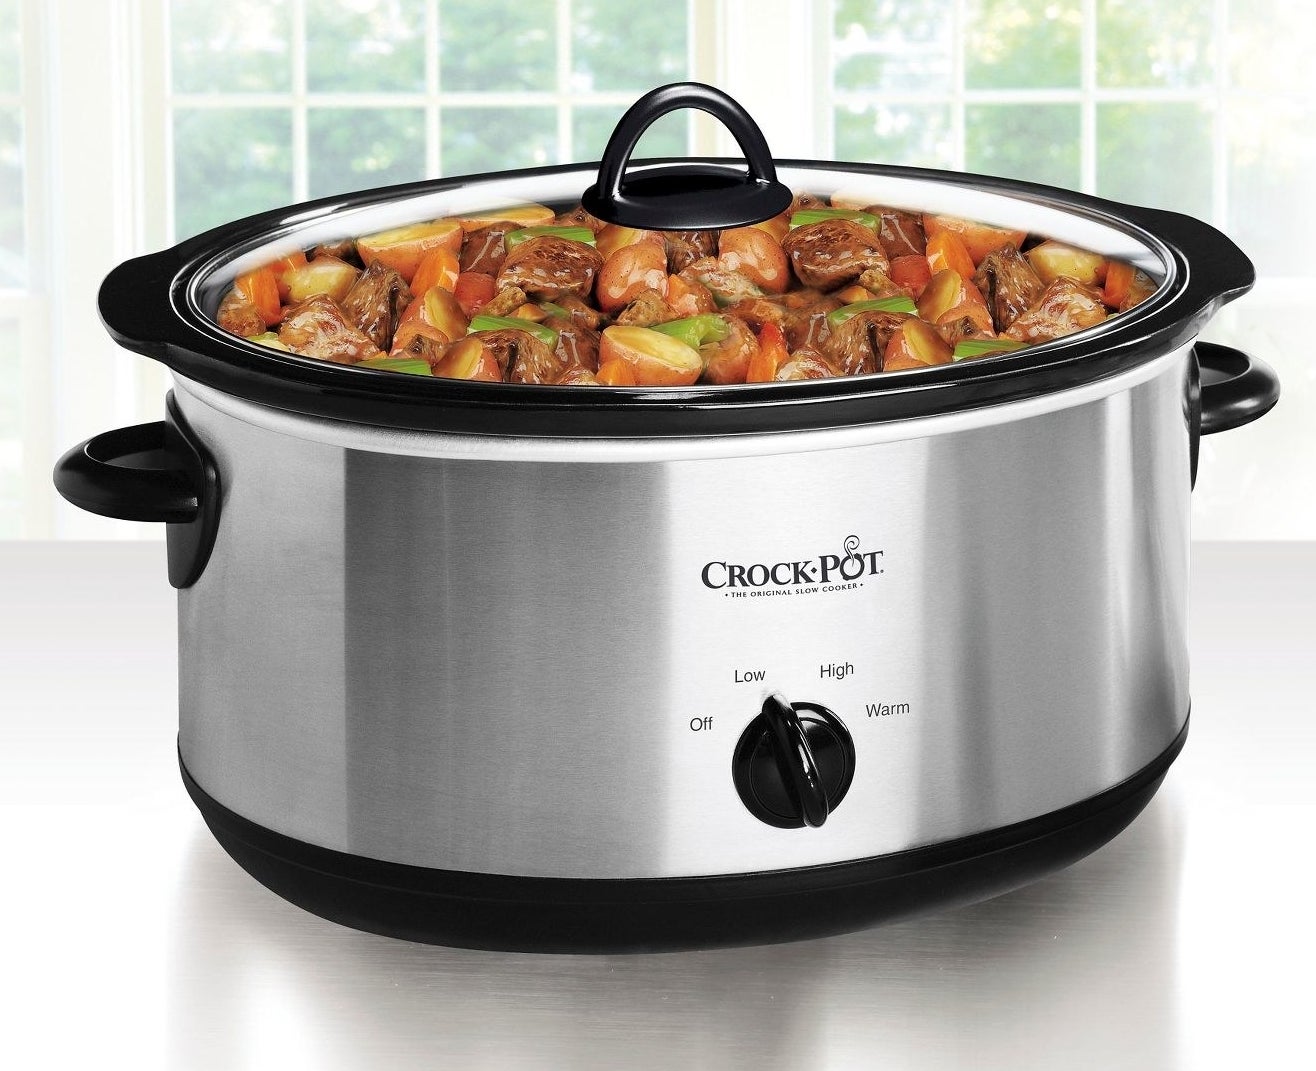 A silver Crock-pot with meat and potatoes cooking inside it